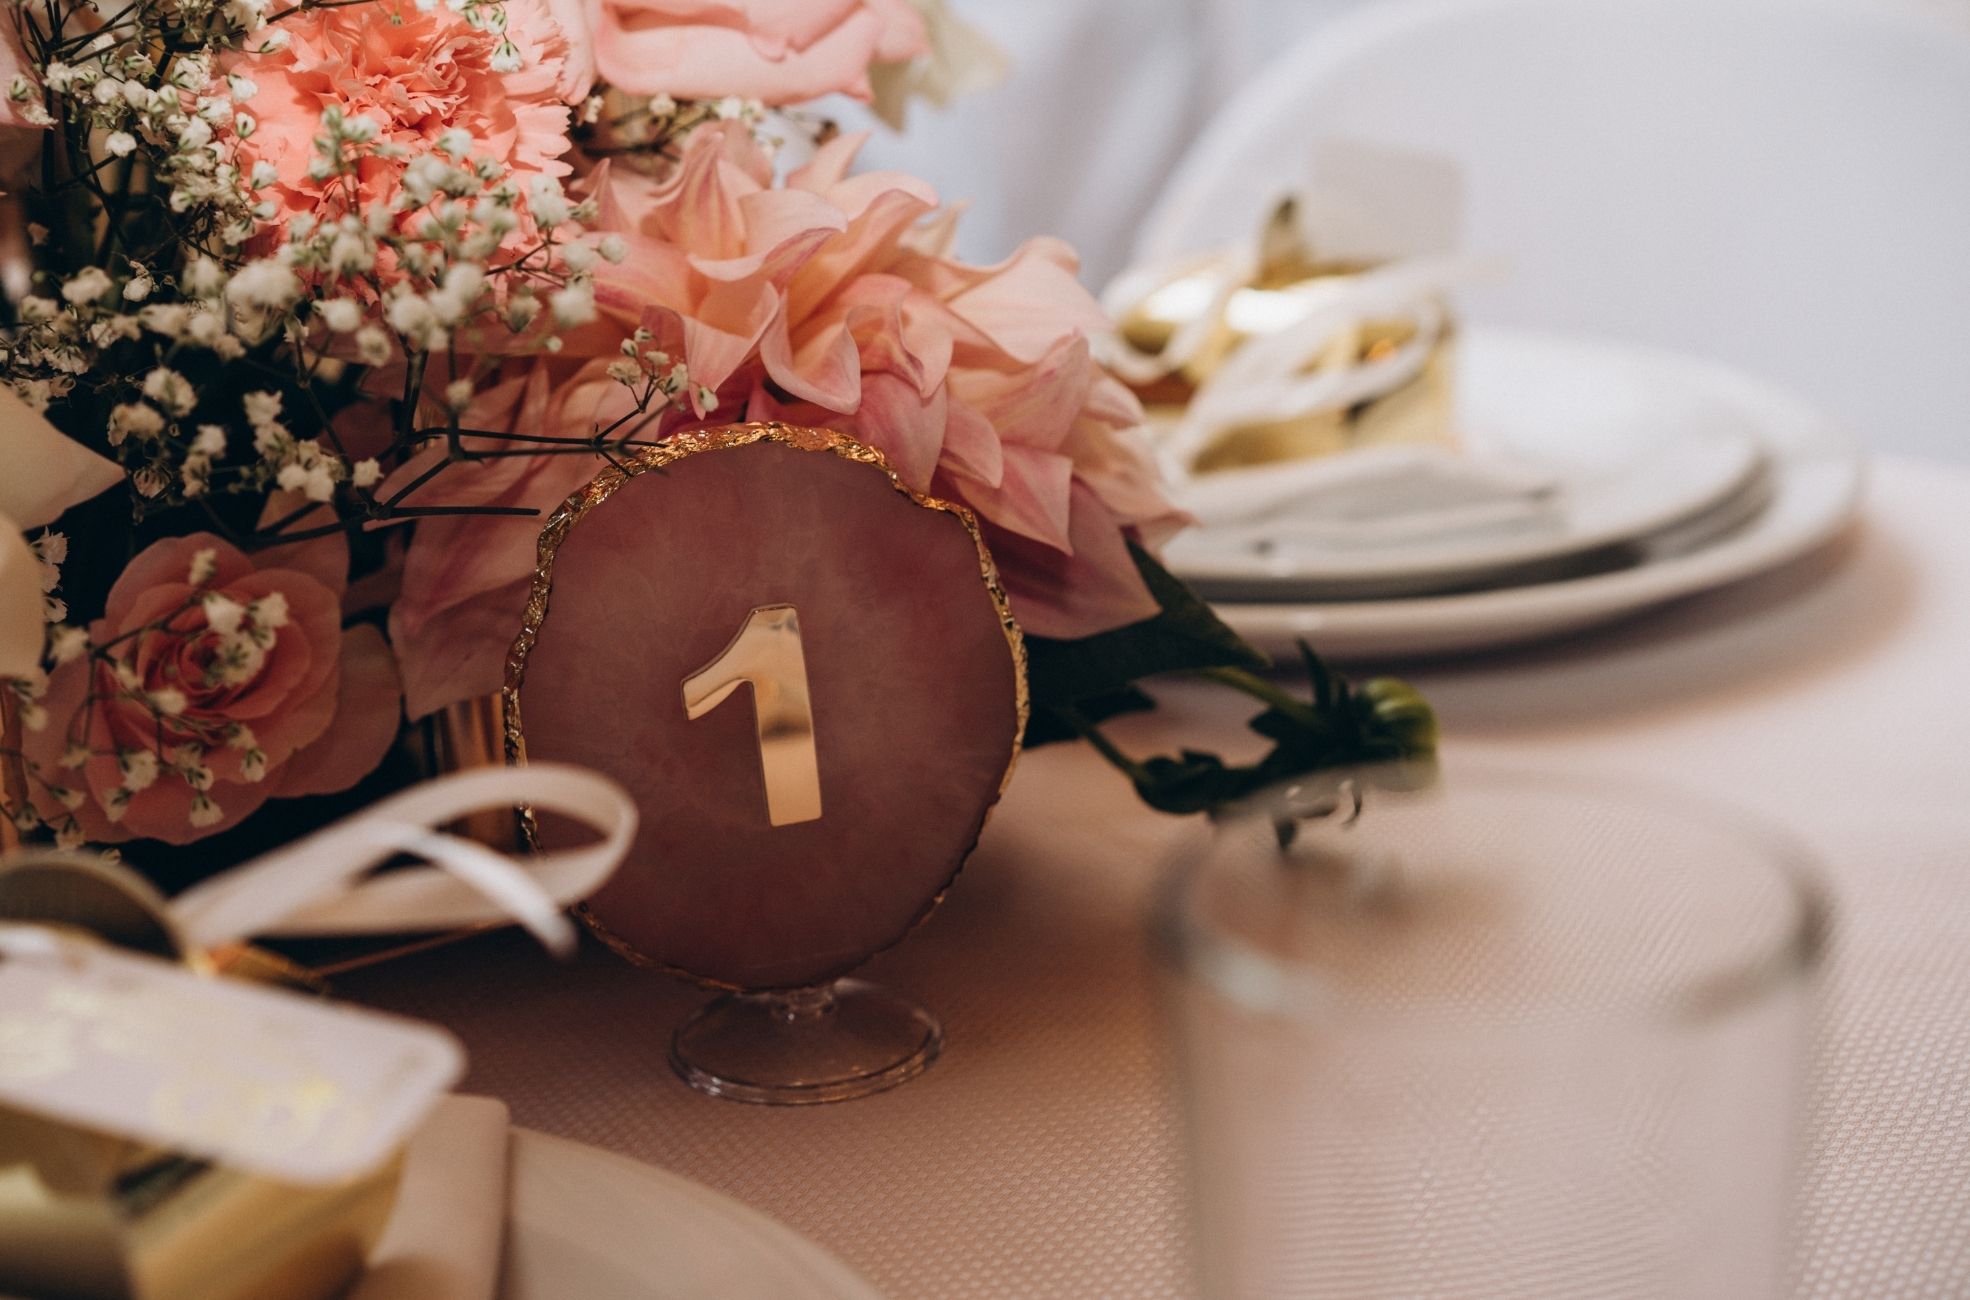 Seating Number At A Wedding